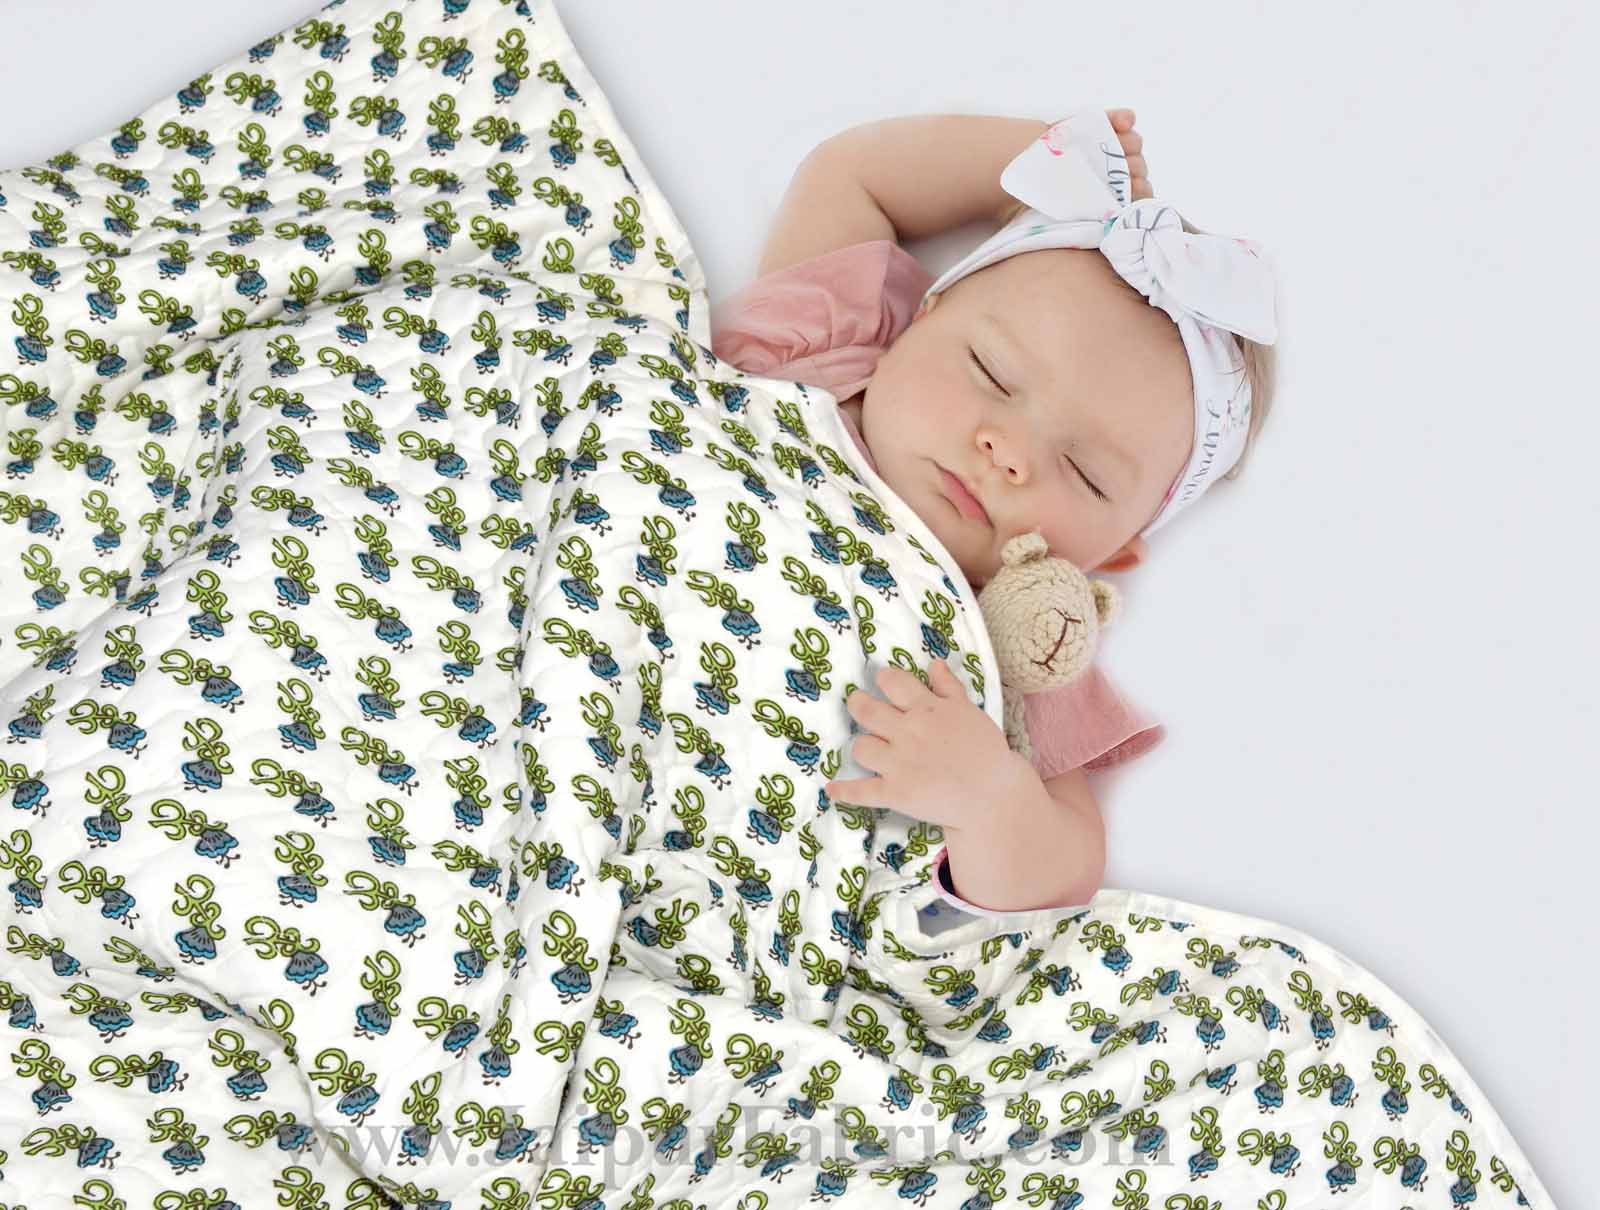 Baby Blanket Newborn Green & Grey Soft Crib Comforter and Toddler Swaddling Blankets for Babies 120 x 120 cm Colourful White Base Baby Quilt